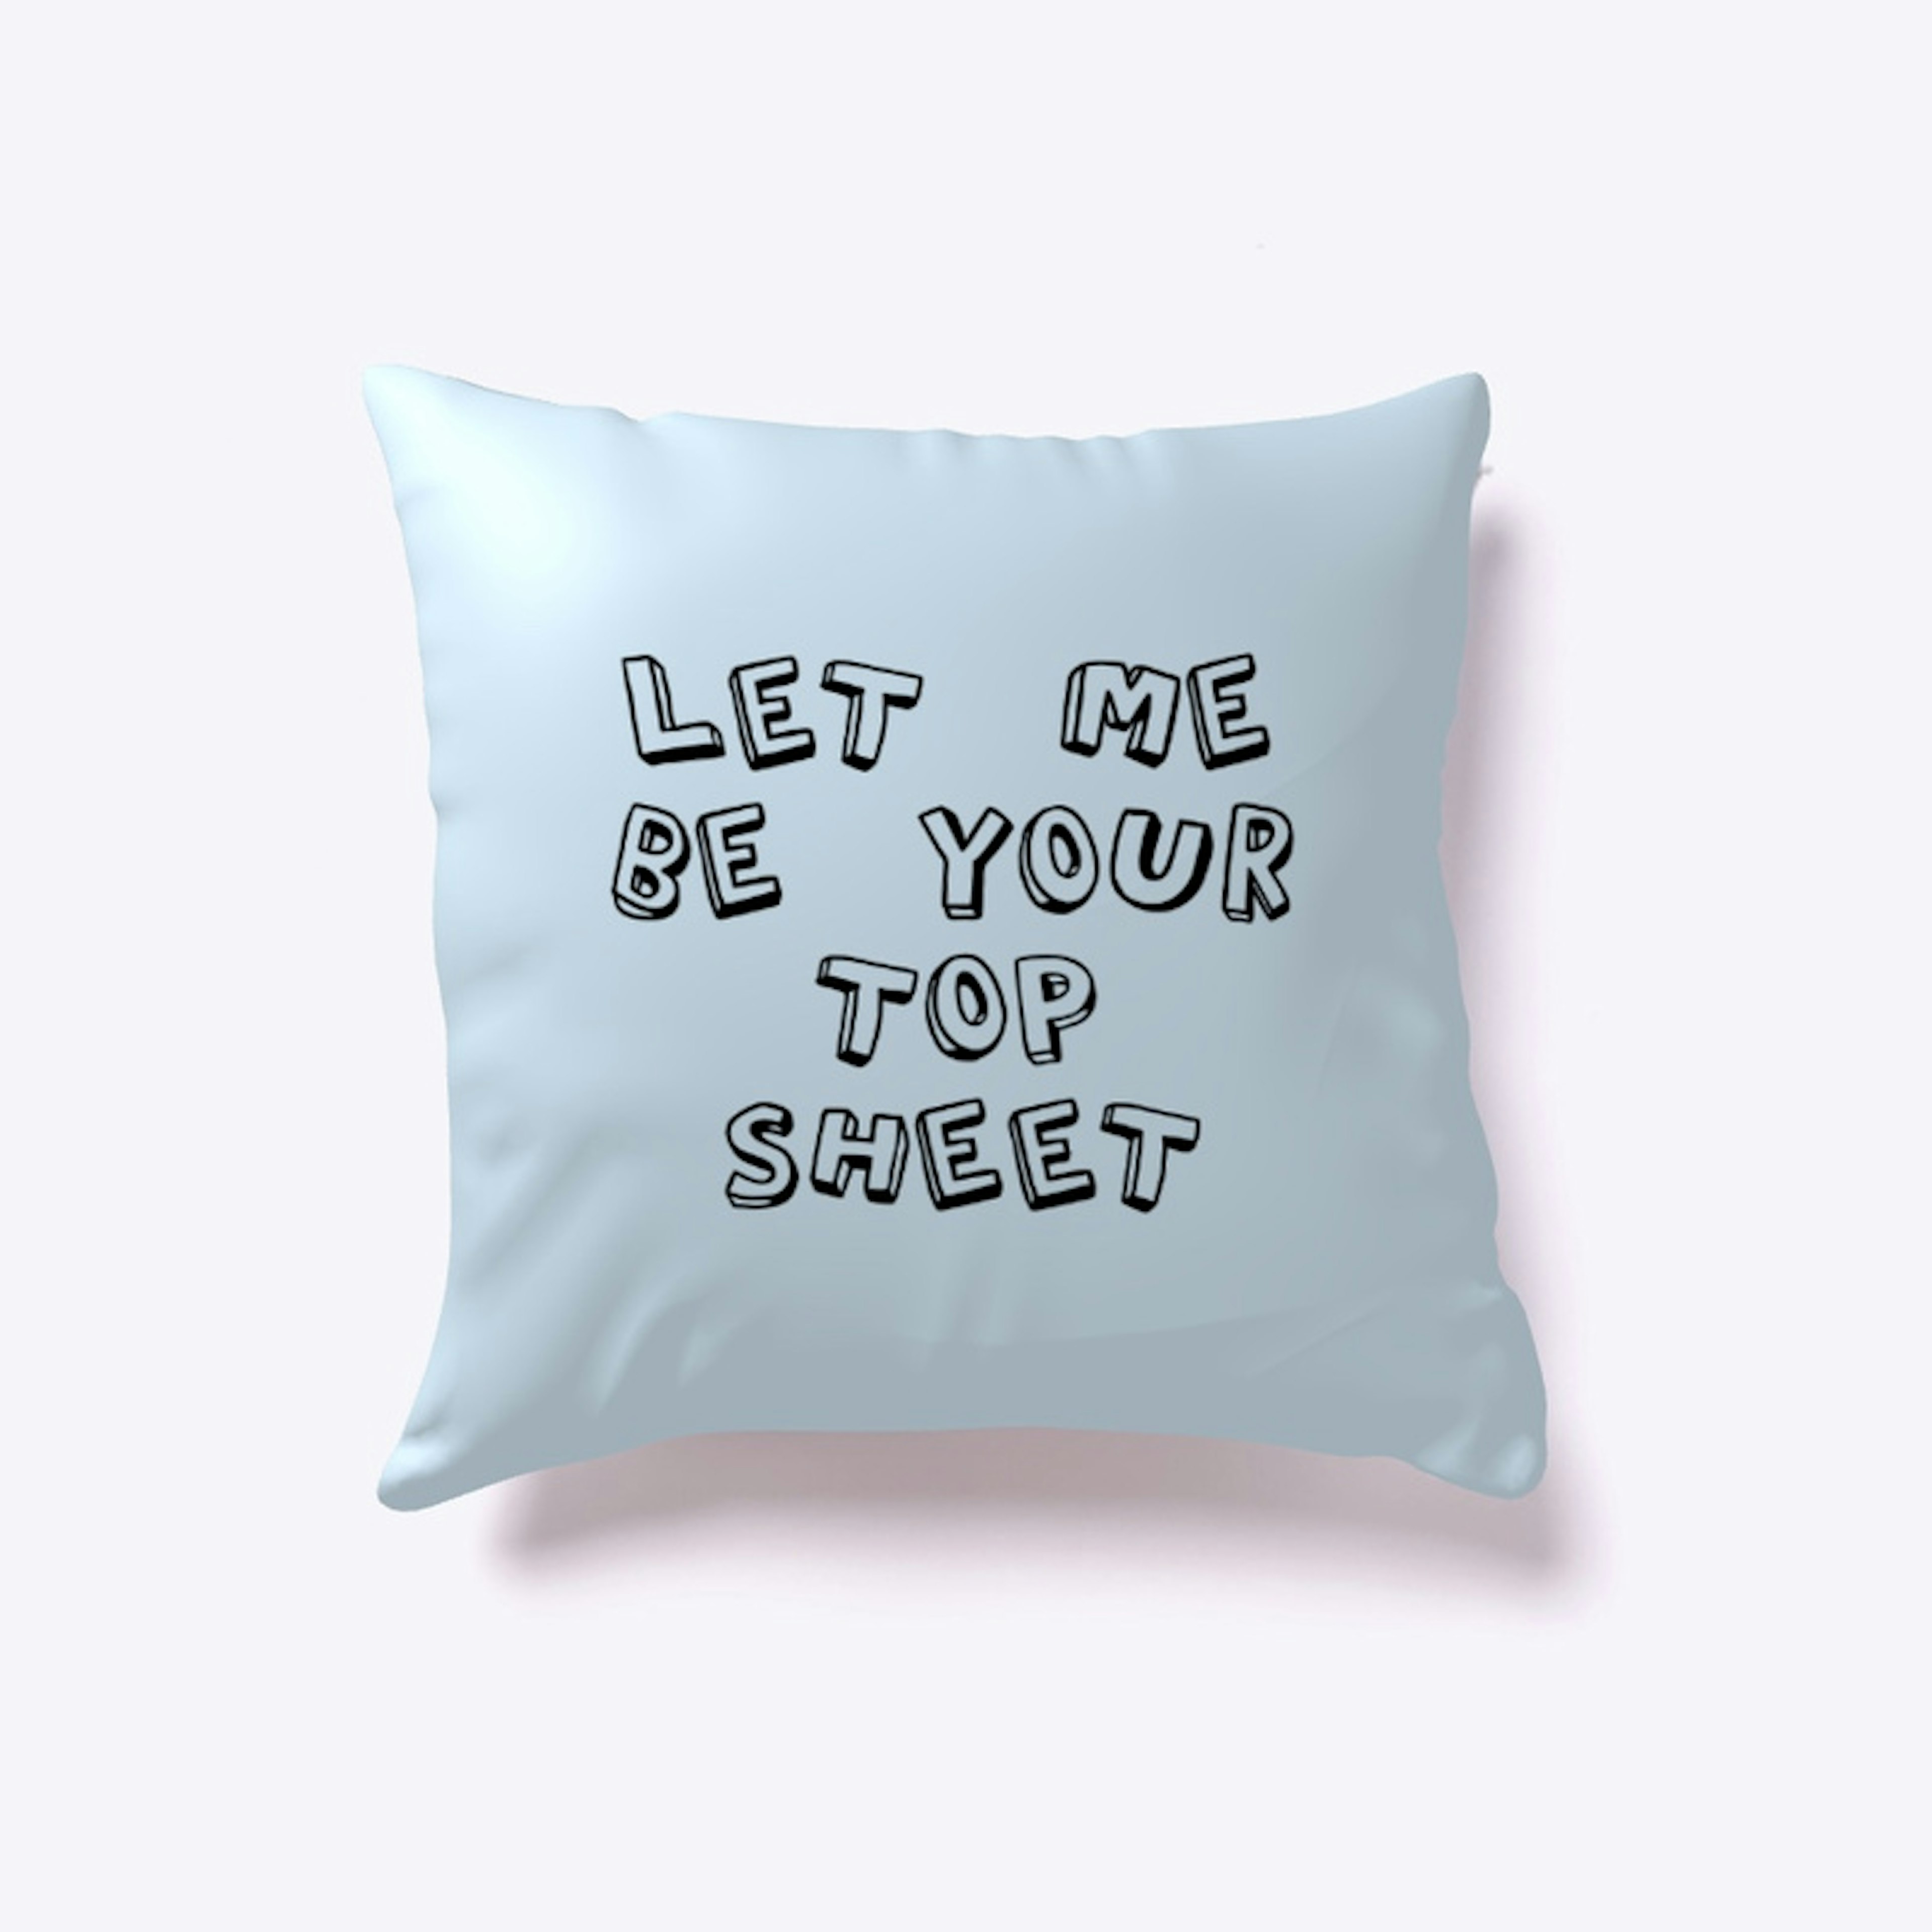 "Let me be your top sheet" Bedding